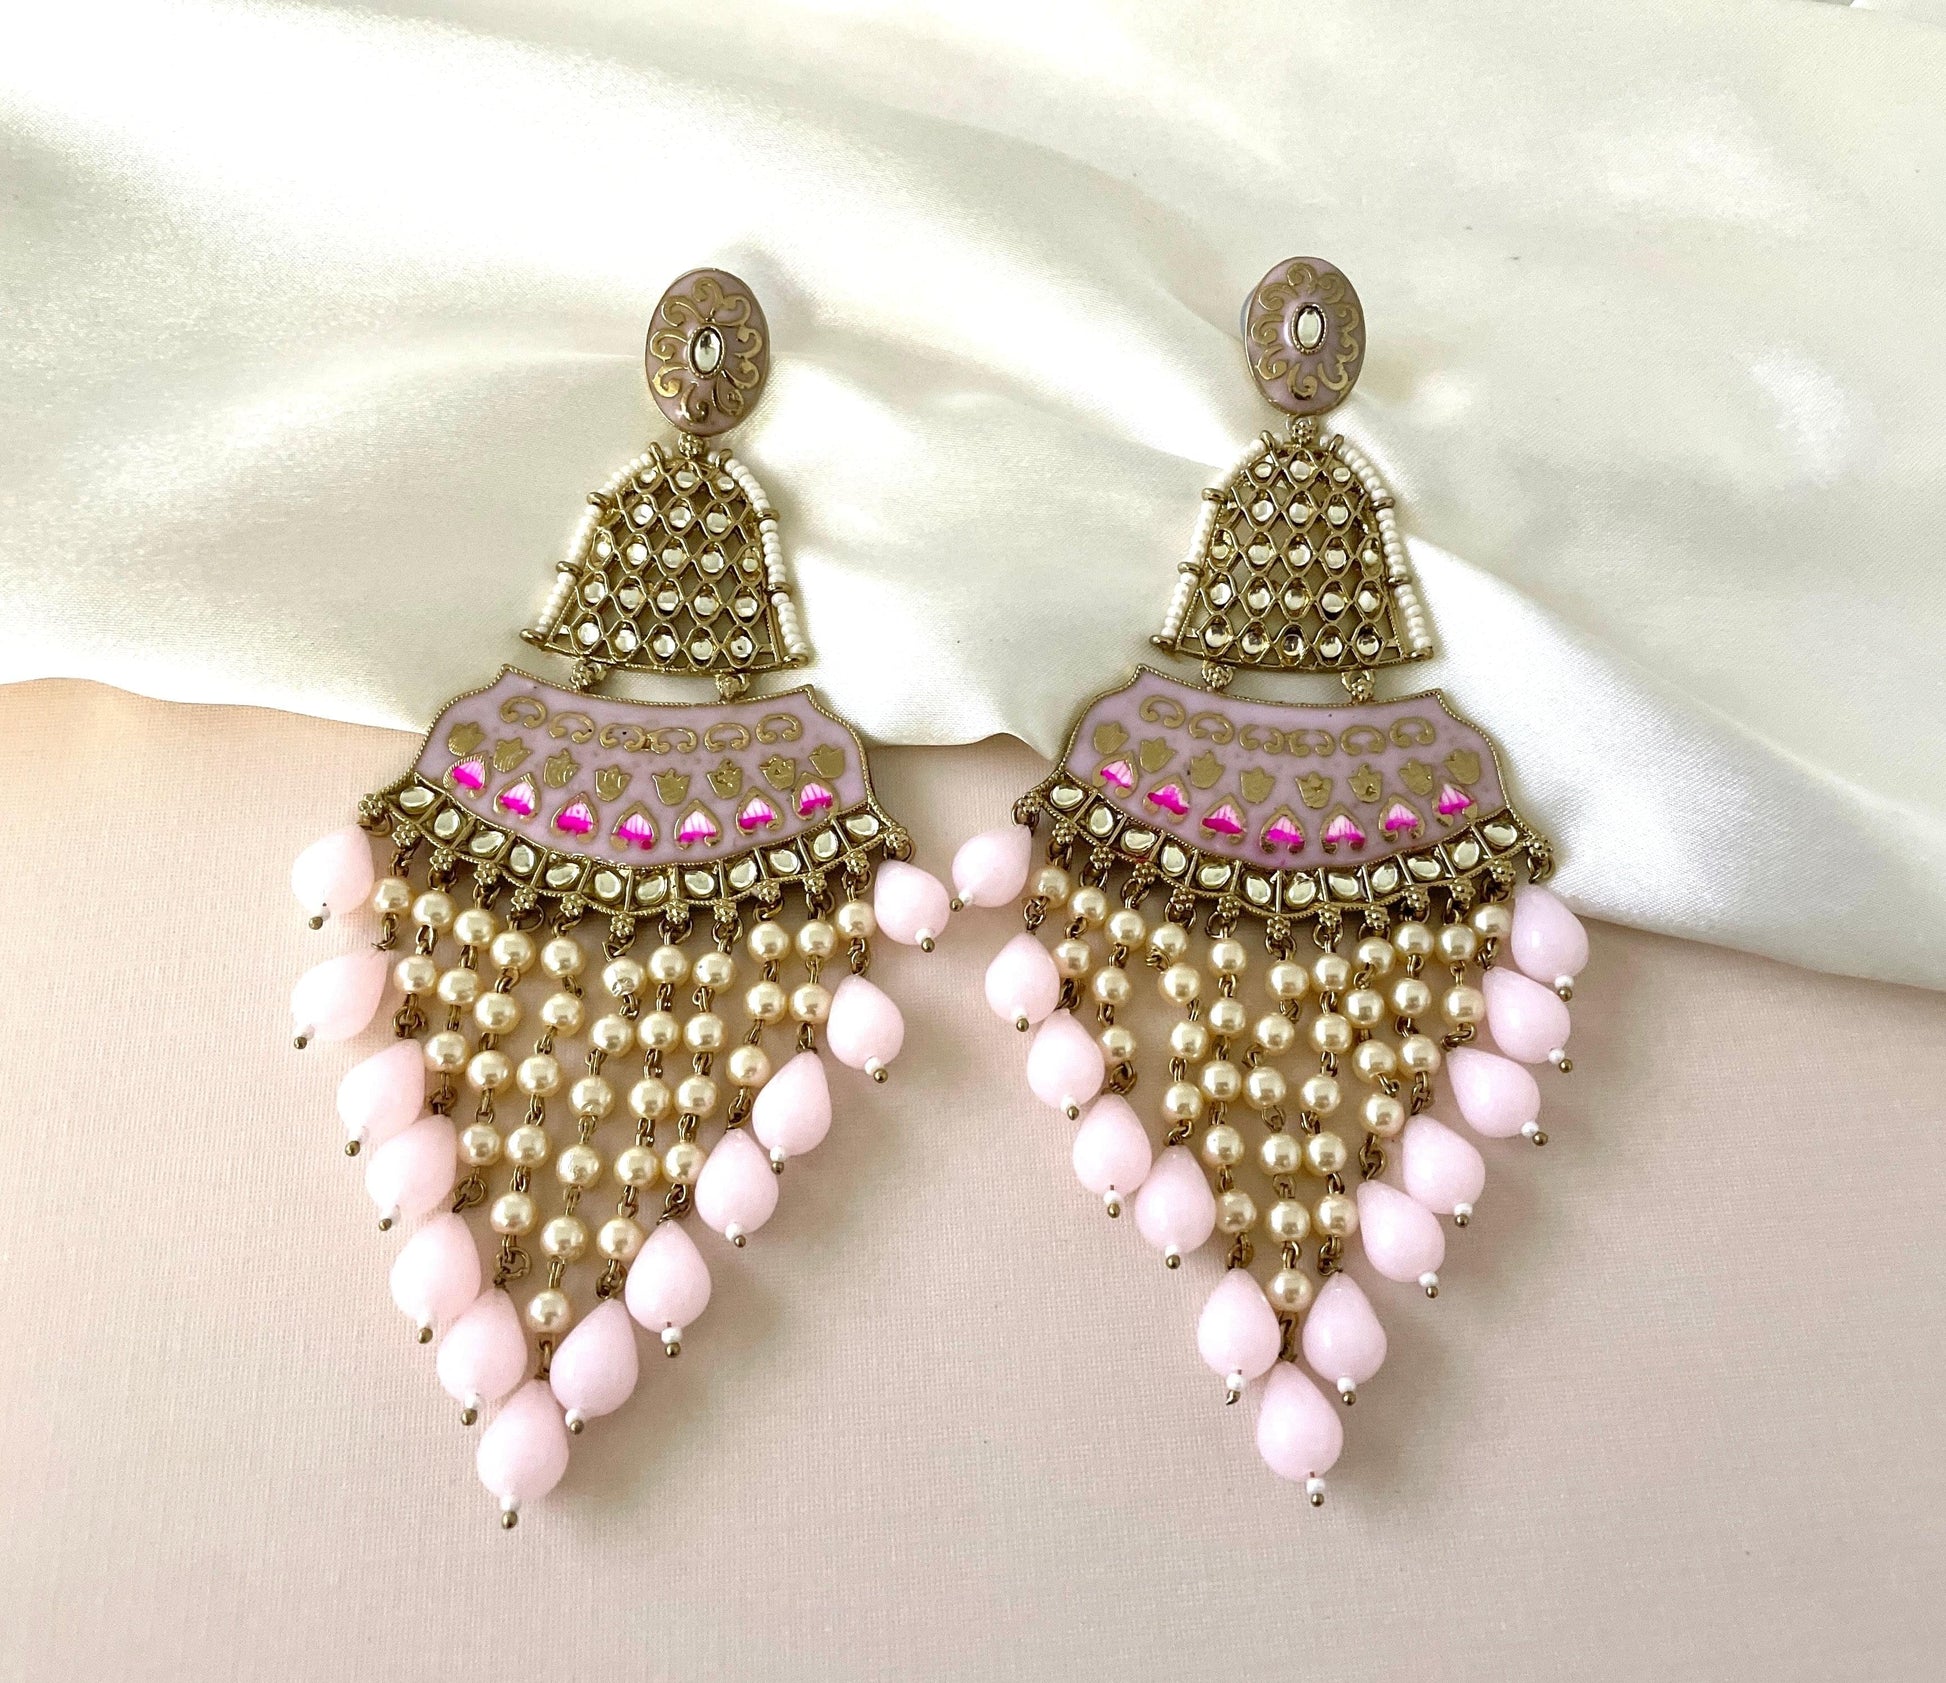 Traditional Indian Chandbalis in Soft Pink